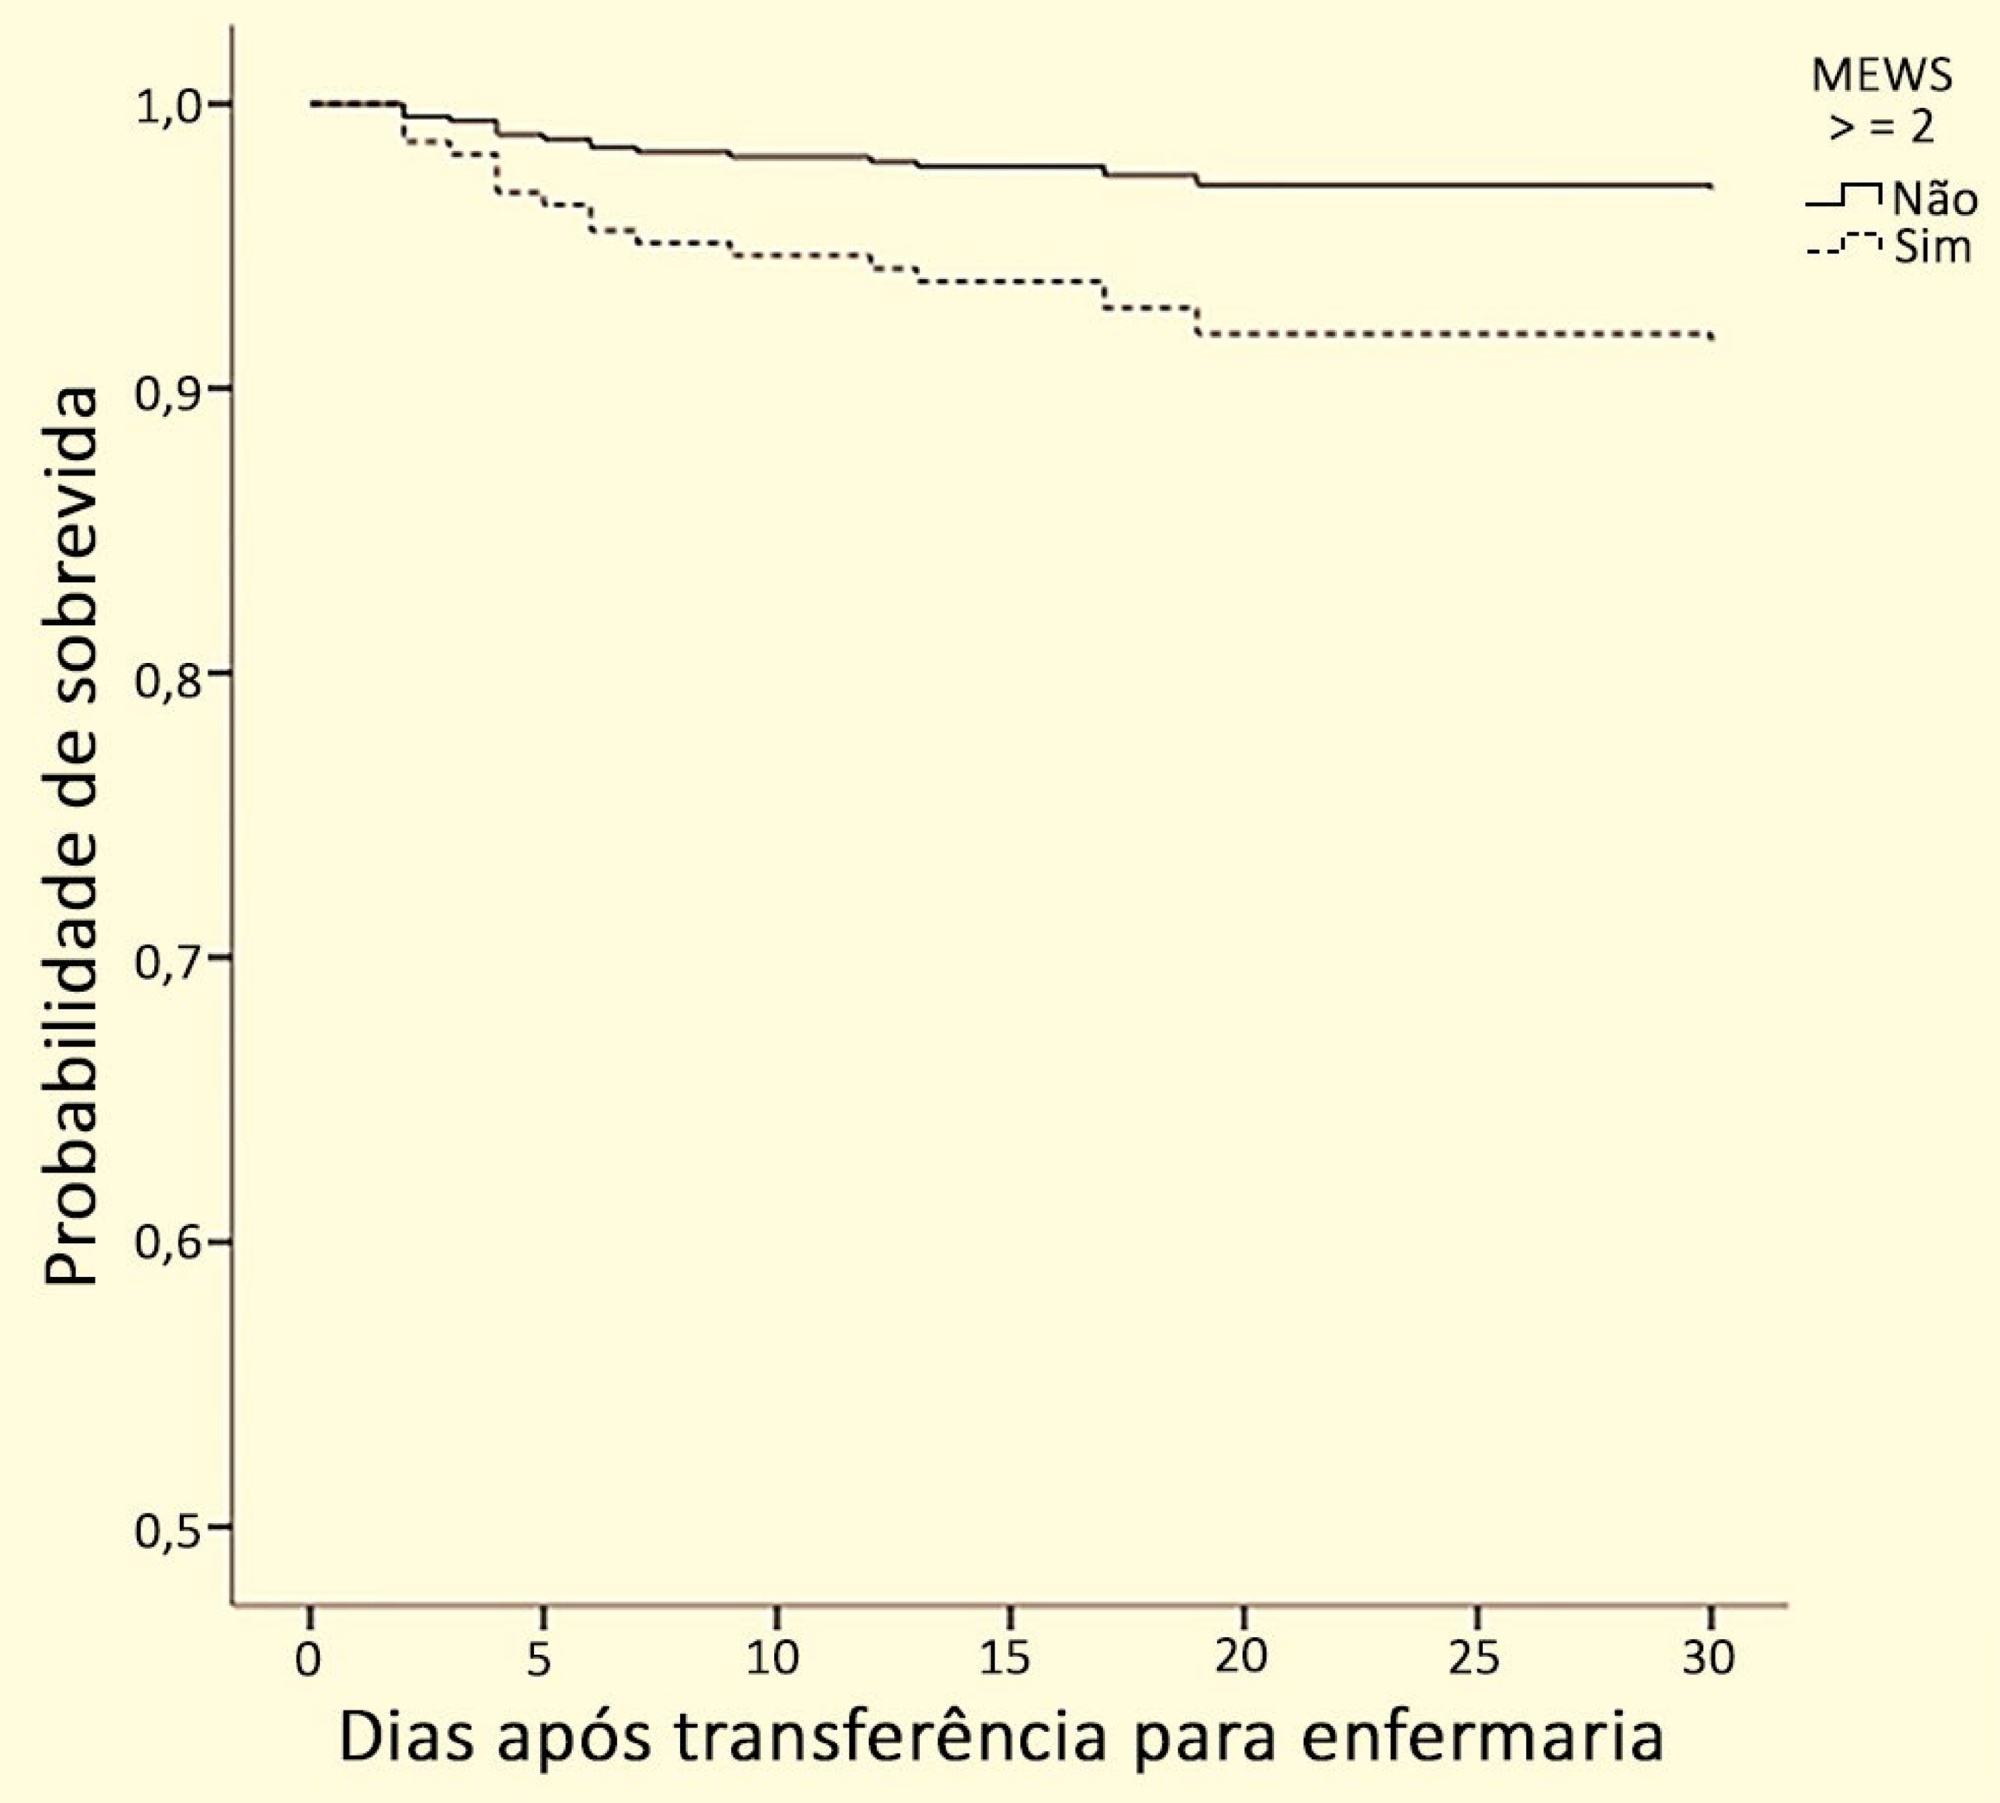 Use of the Modified Early Warning Score in intrahospital transfer of patients